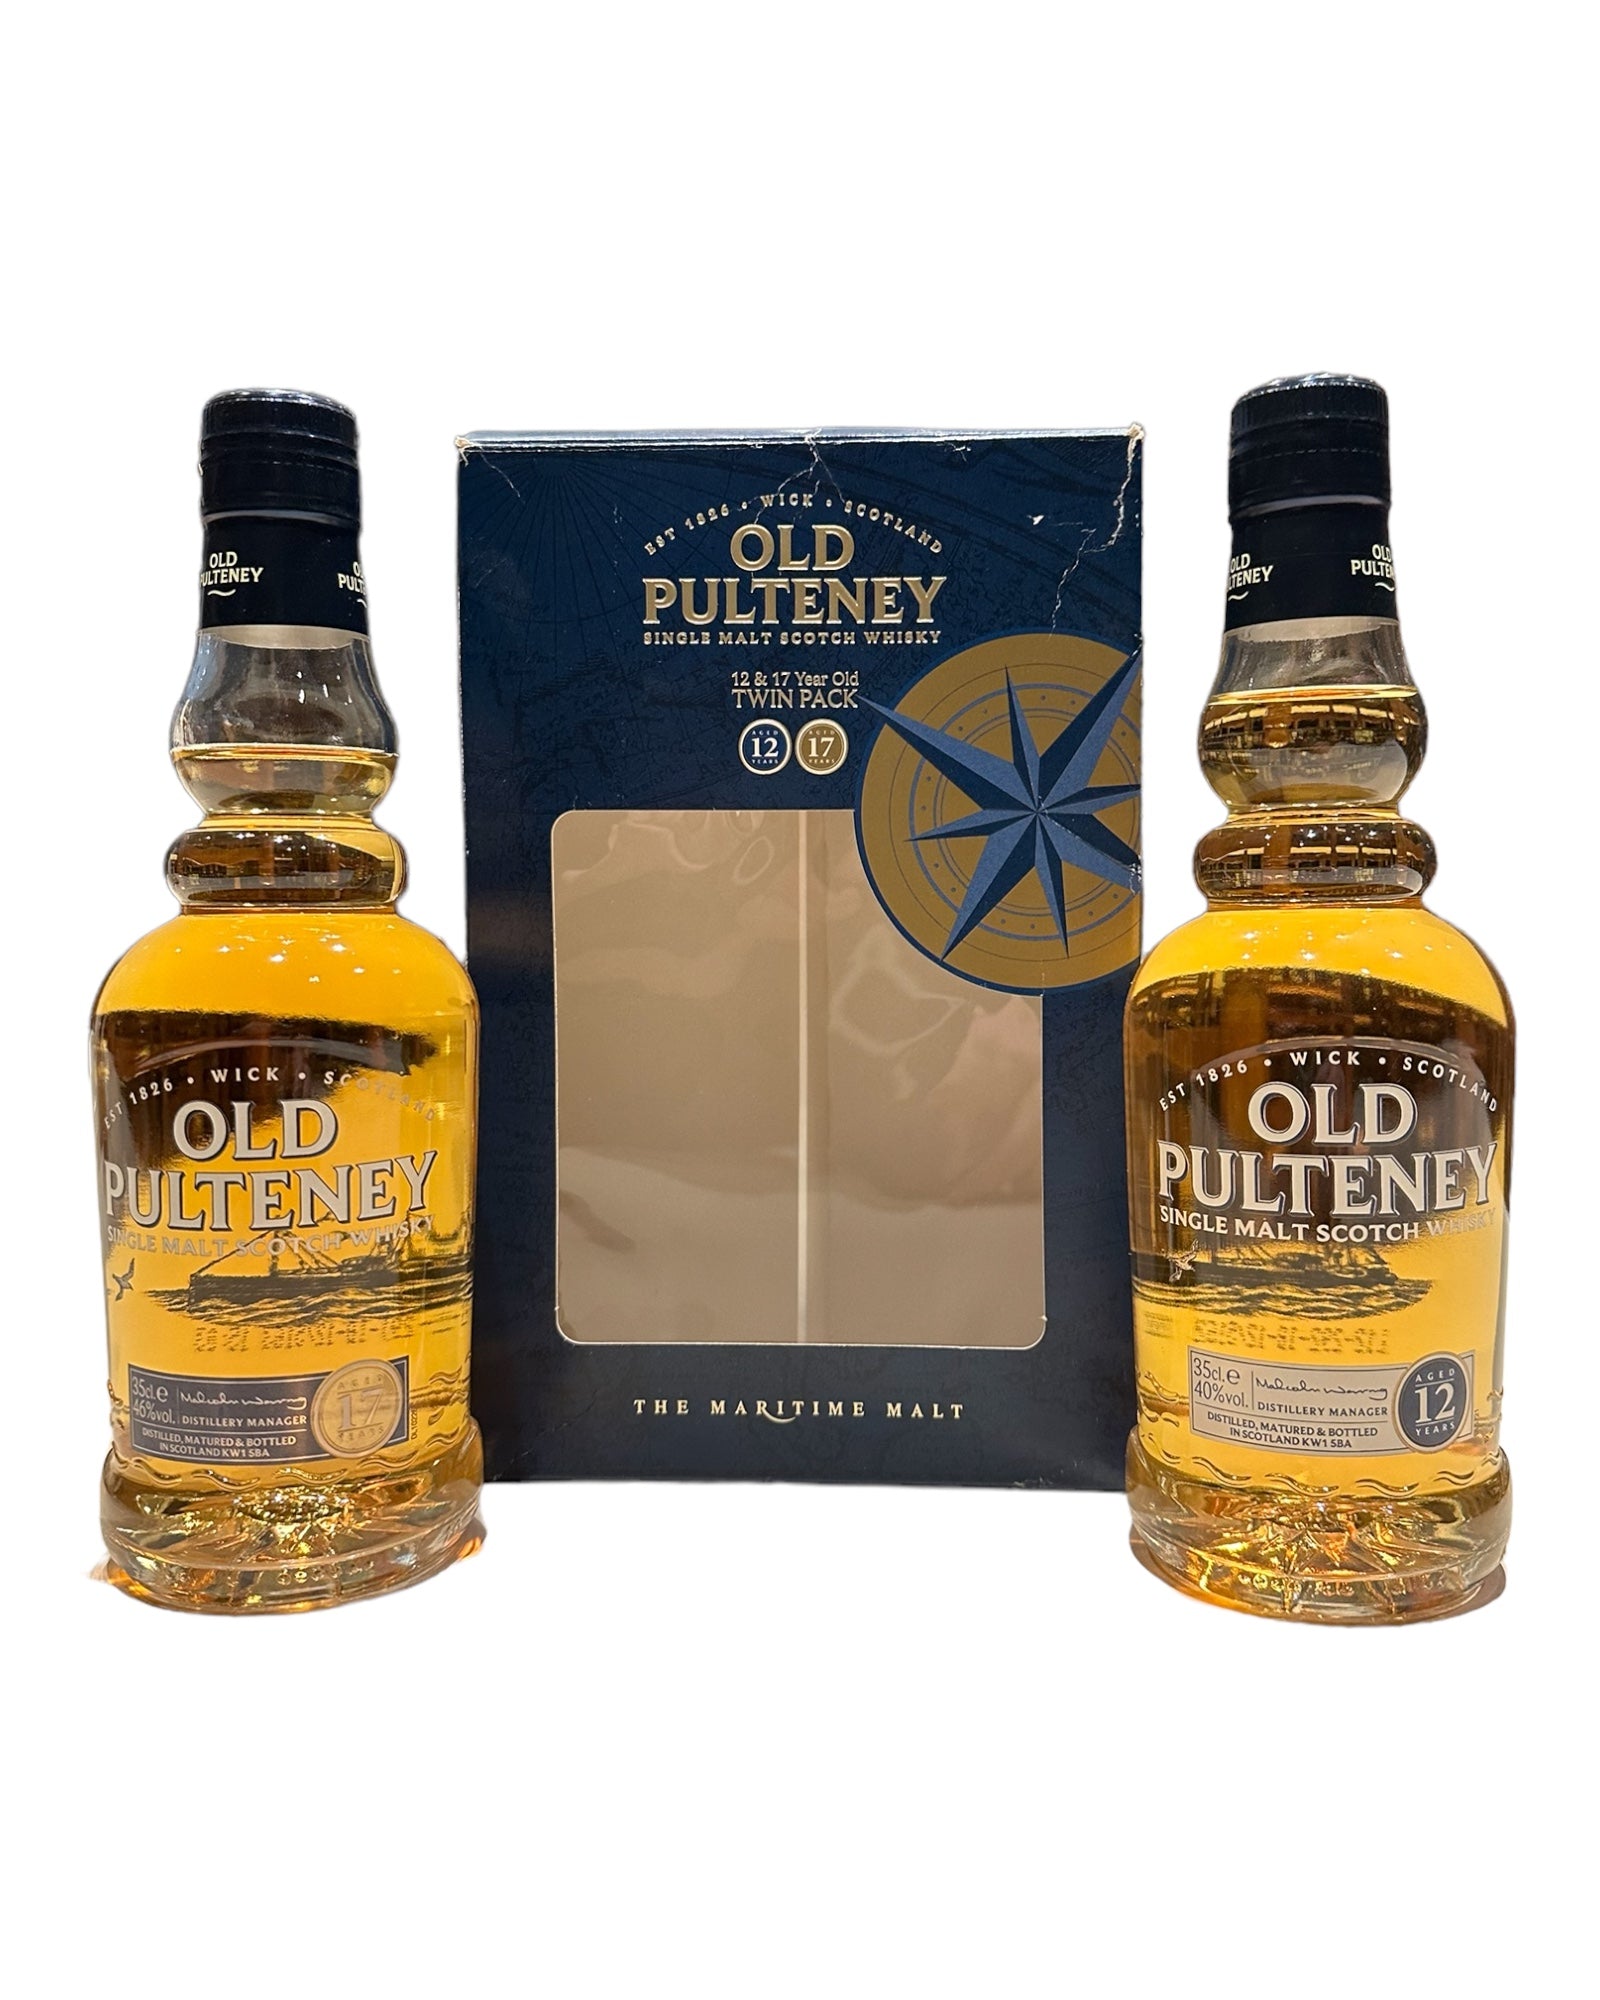 Old Pulteney 12 & 17 Year Old Twin Pack 2 x 35cl